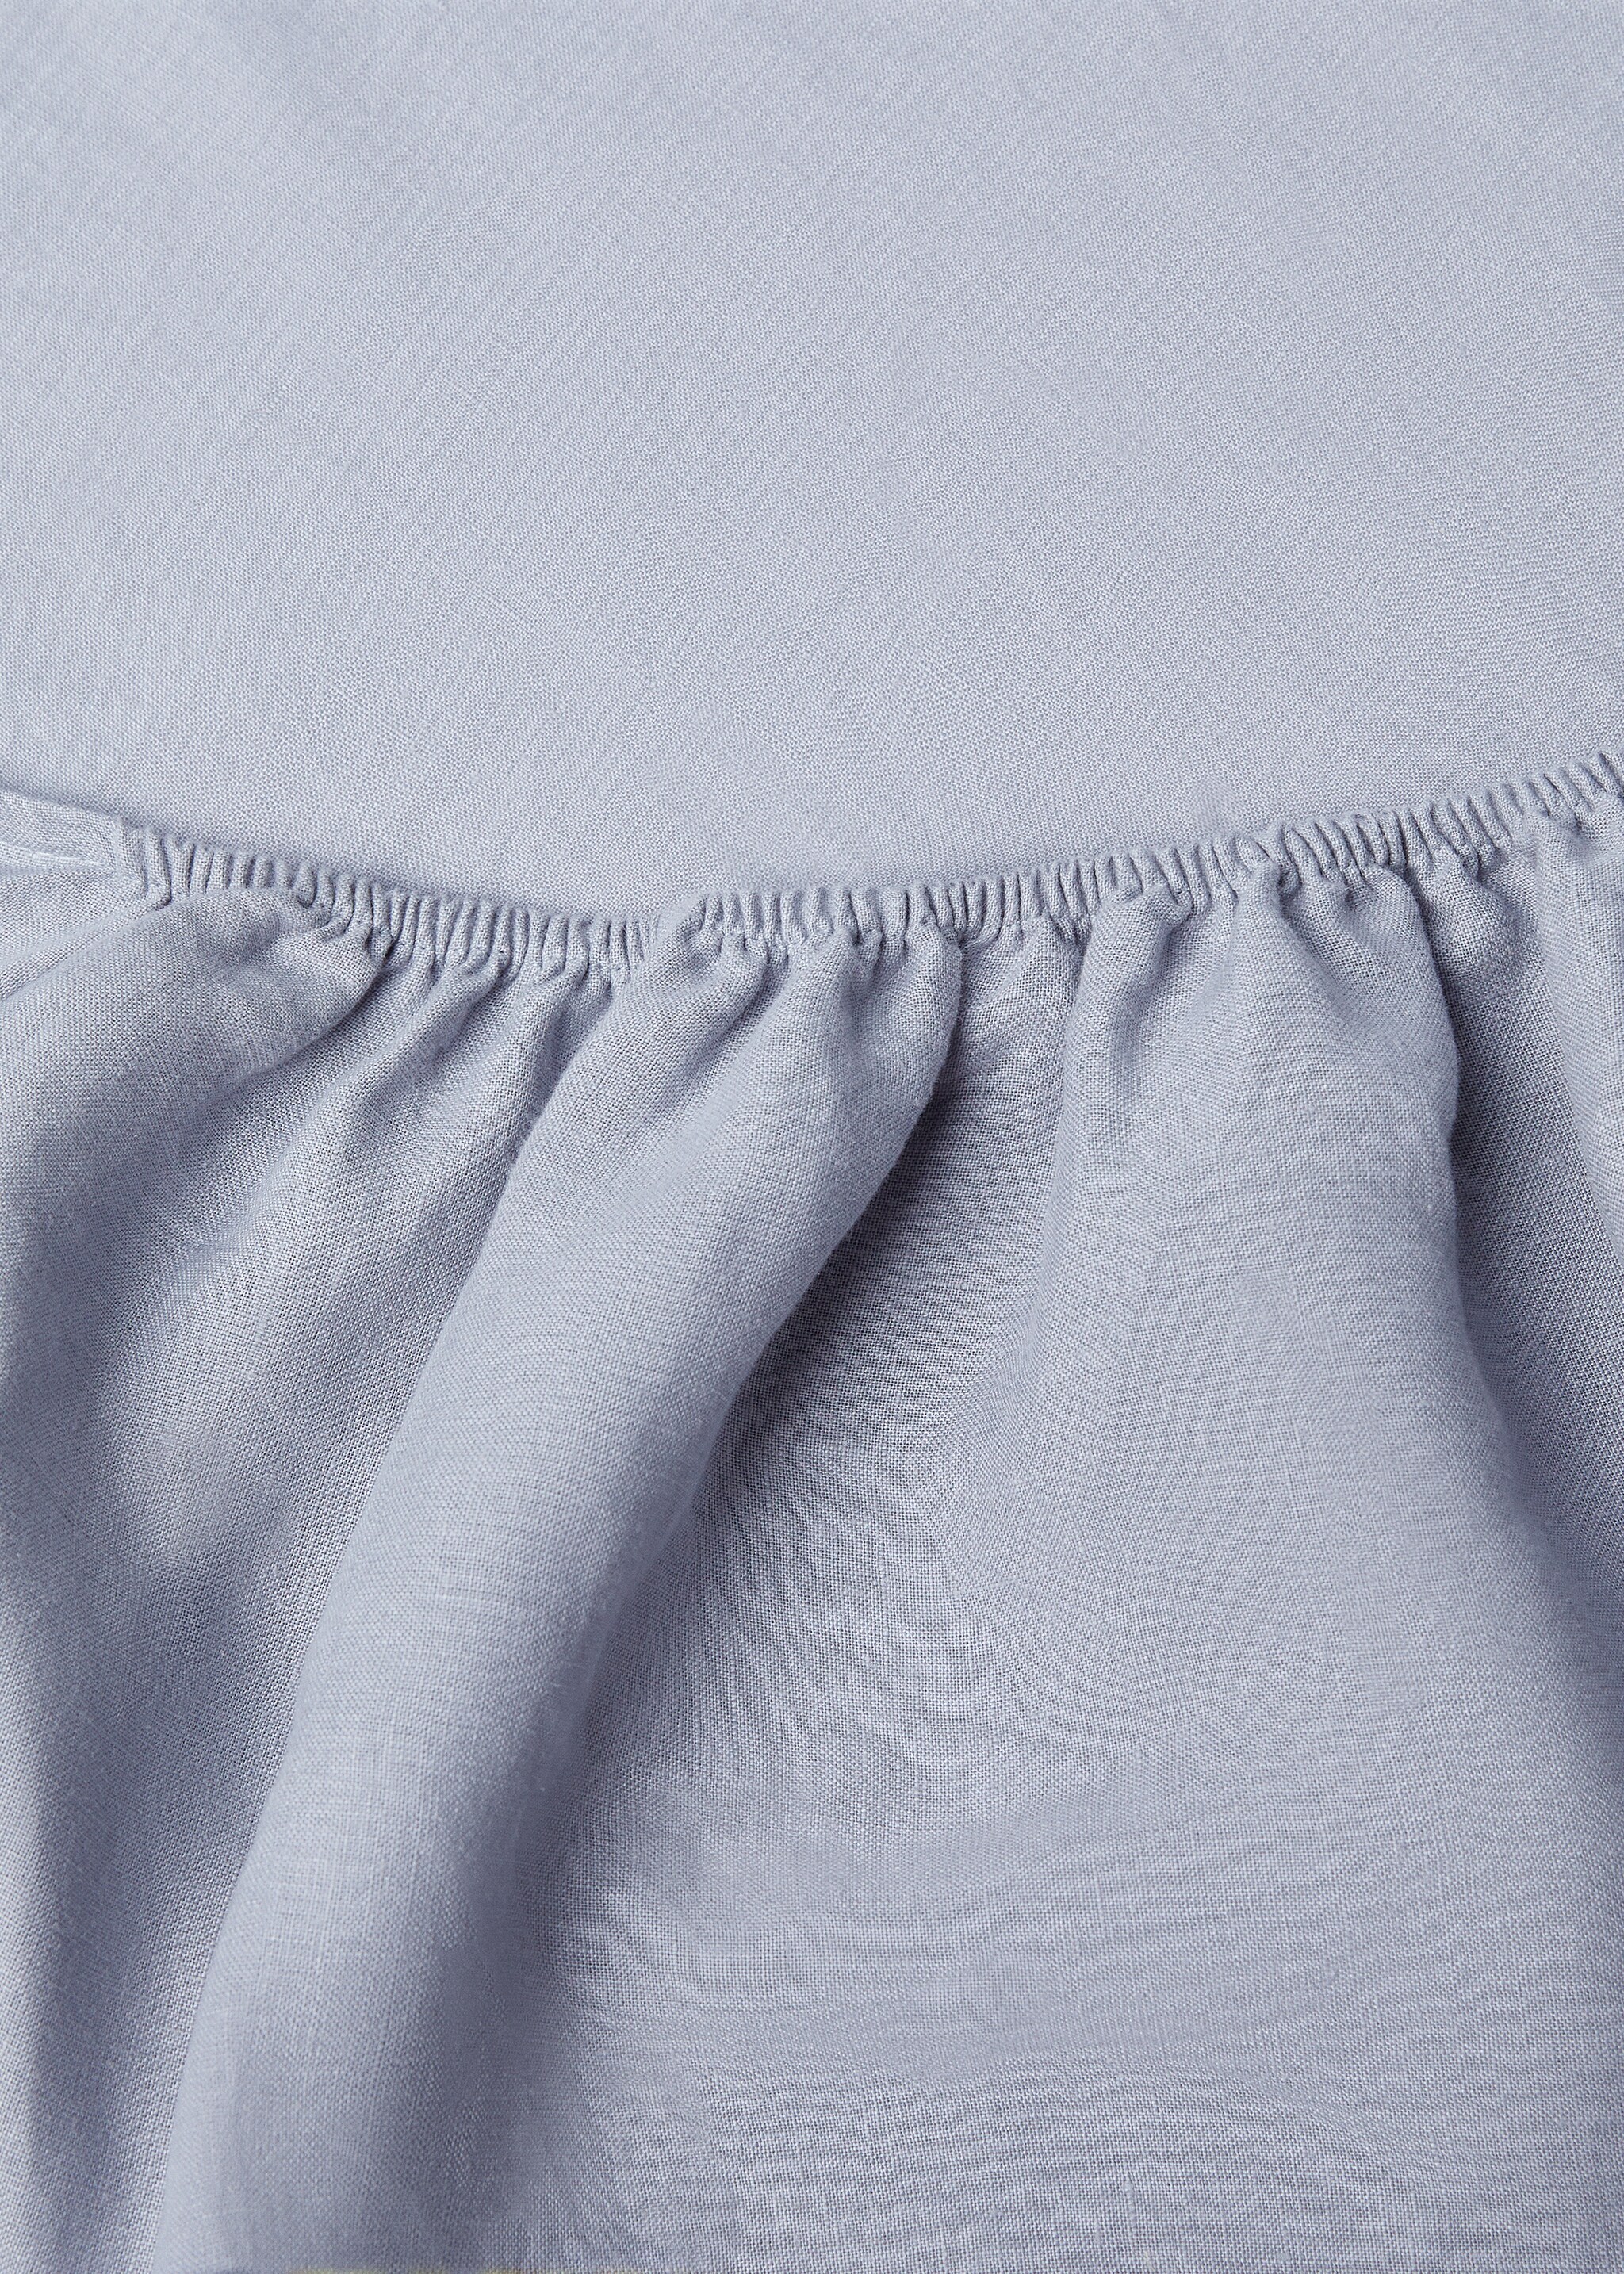 100% linen fitted sheet for 180cm bed - Details of the article 3